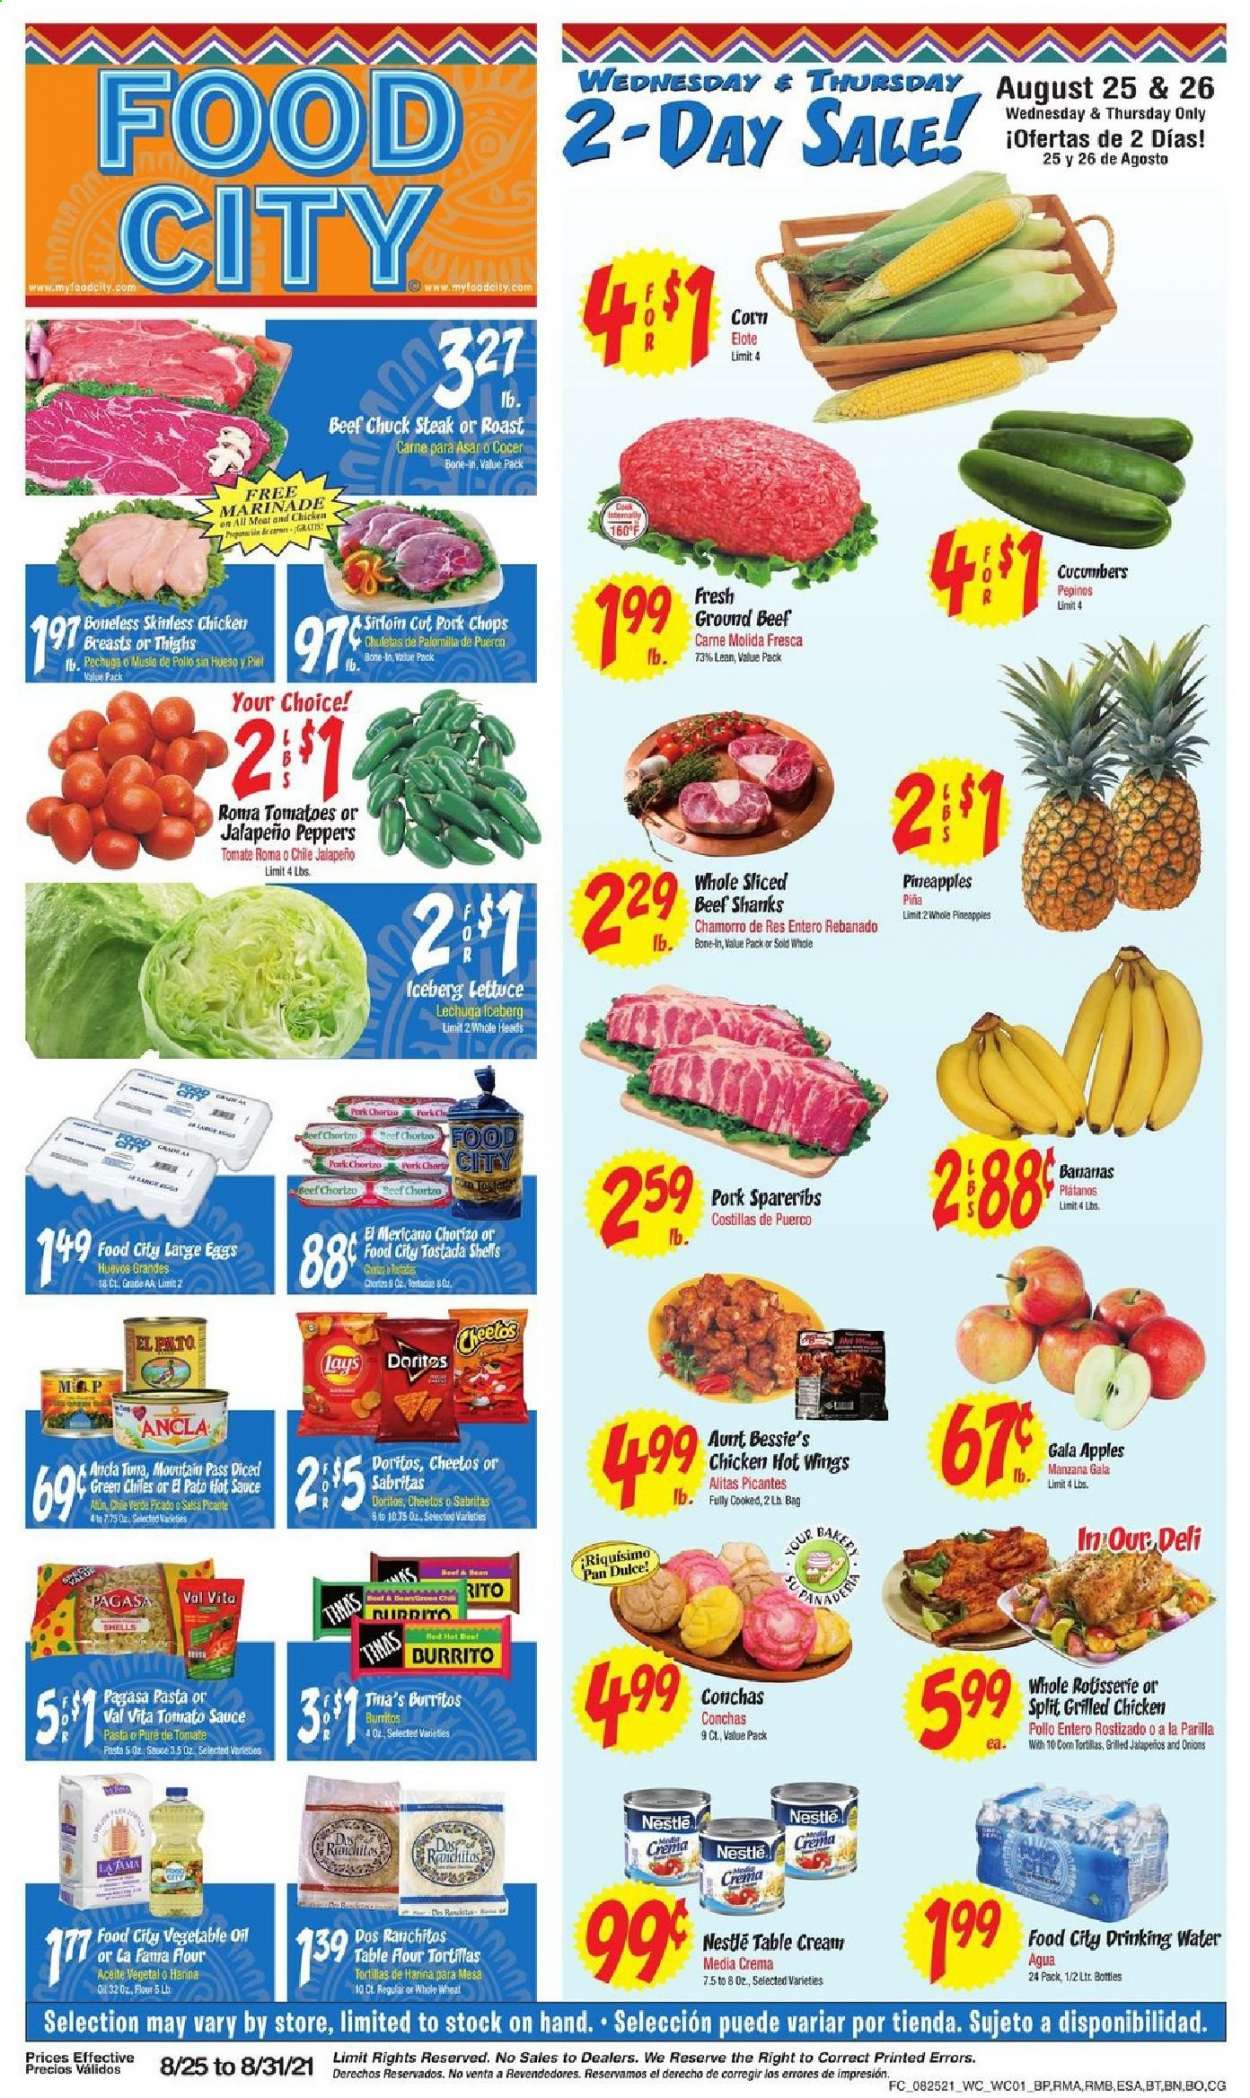 thumbnail - Food City Flyer - 08/25/2021 - 08/31/2021 - Sales products - tortillas, Aunt Bessie's, corn, cucumber, tomatoes, lettuce, apples, bananas, Gala, pineapple, sauce, burrito, chorizo, large eggs, Nestlé, Doritos, Cheetos, Lay’s, tomato sauce, hot sauce, marinade, oil, chicken breasts, beef meat, ground beef, steak, chuck steak, pork chops, pork meat, pork spare ribs. Page 1.